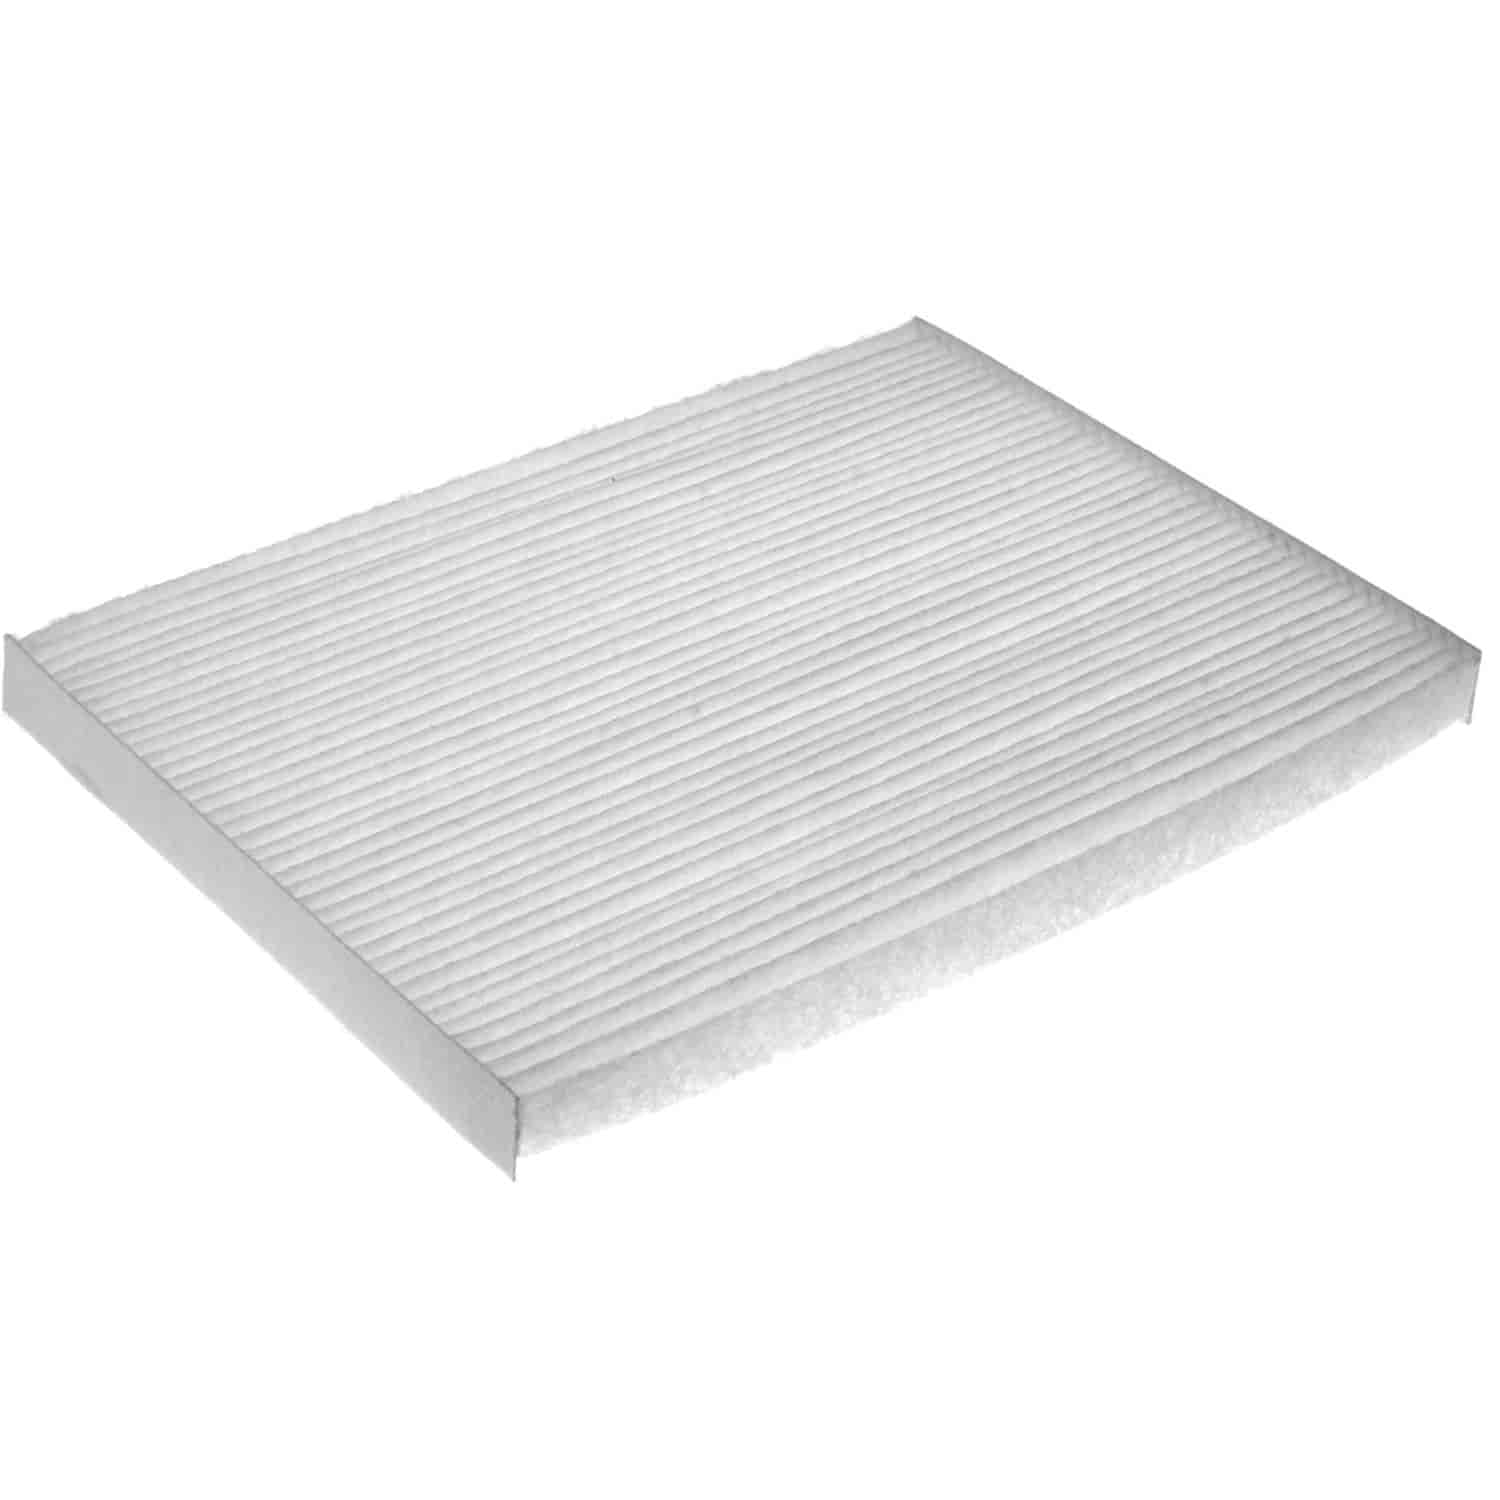 Mahle Cabin Air Filter for Nissan fits Sentra